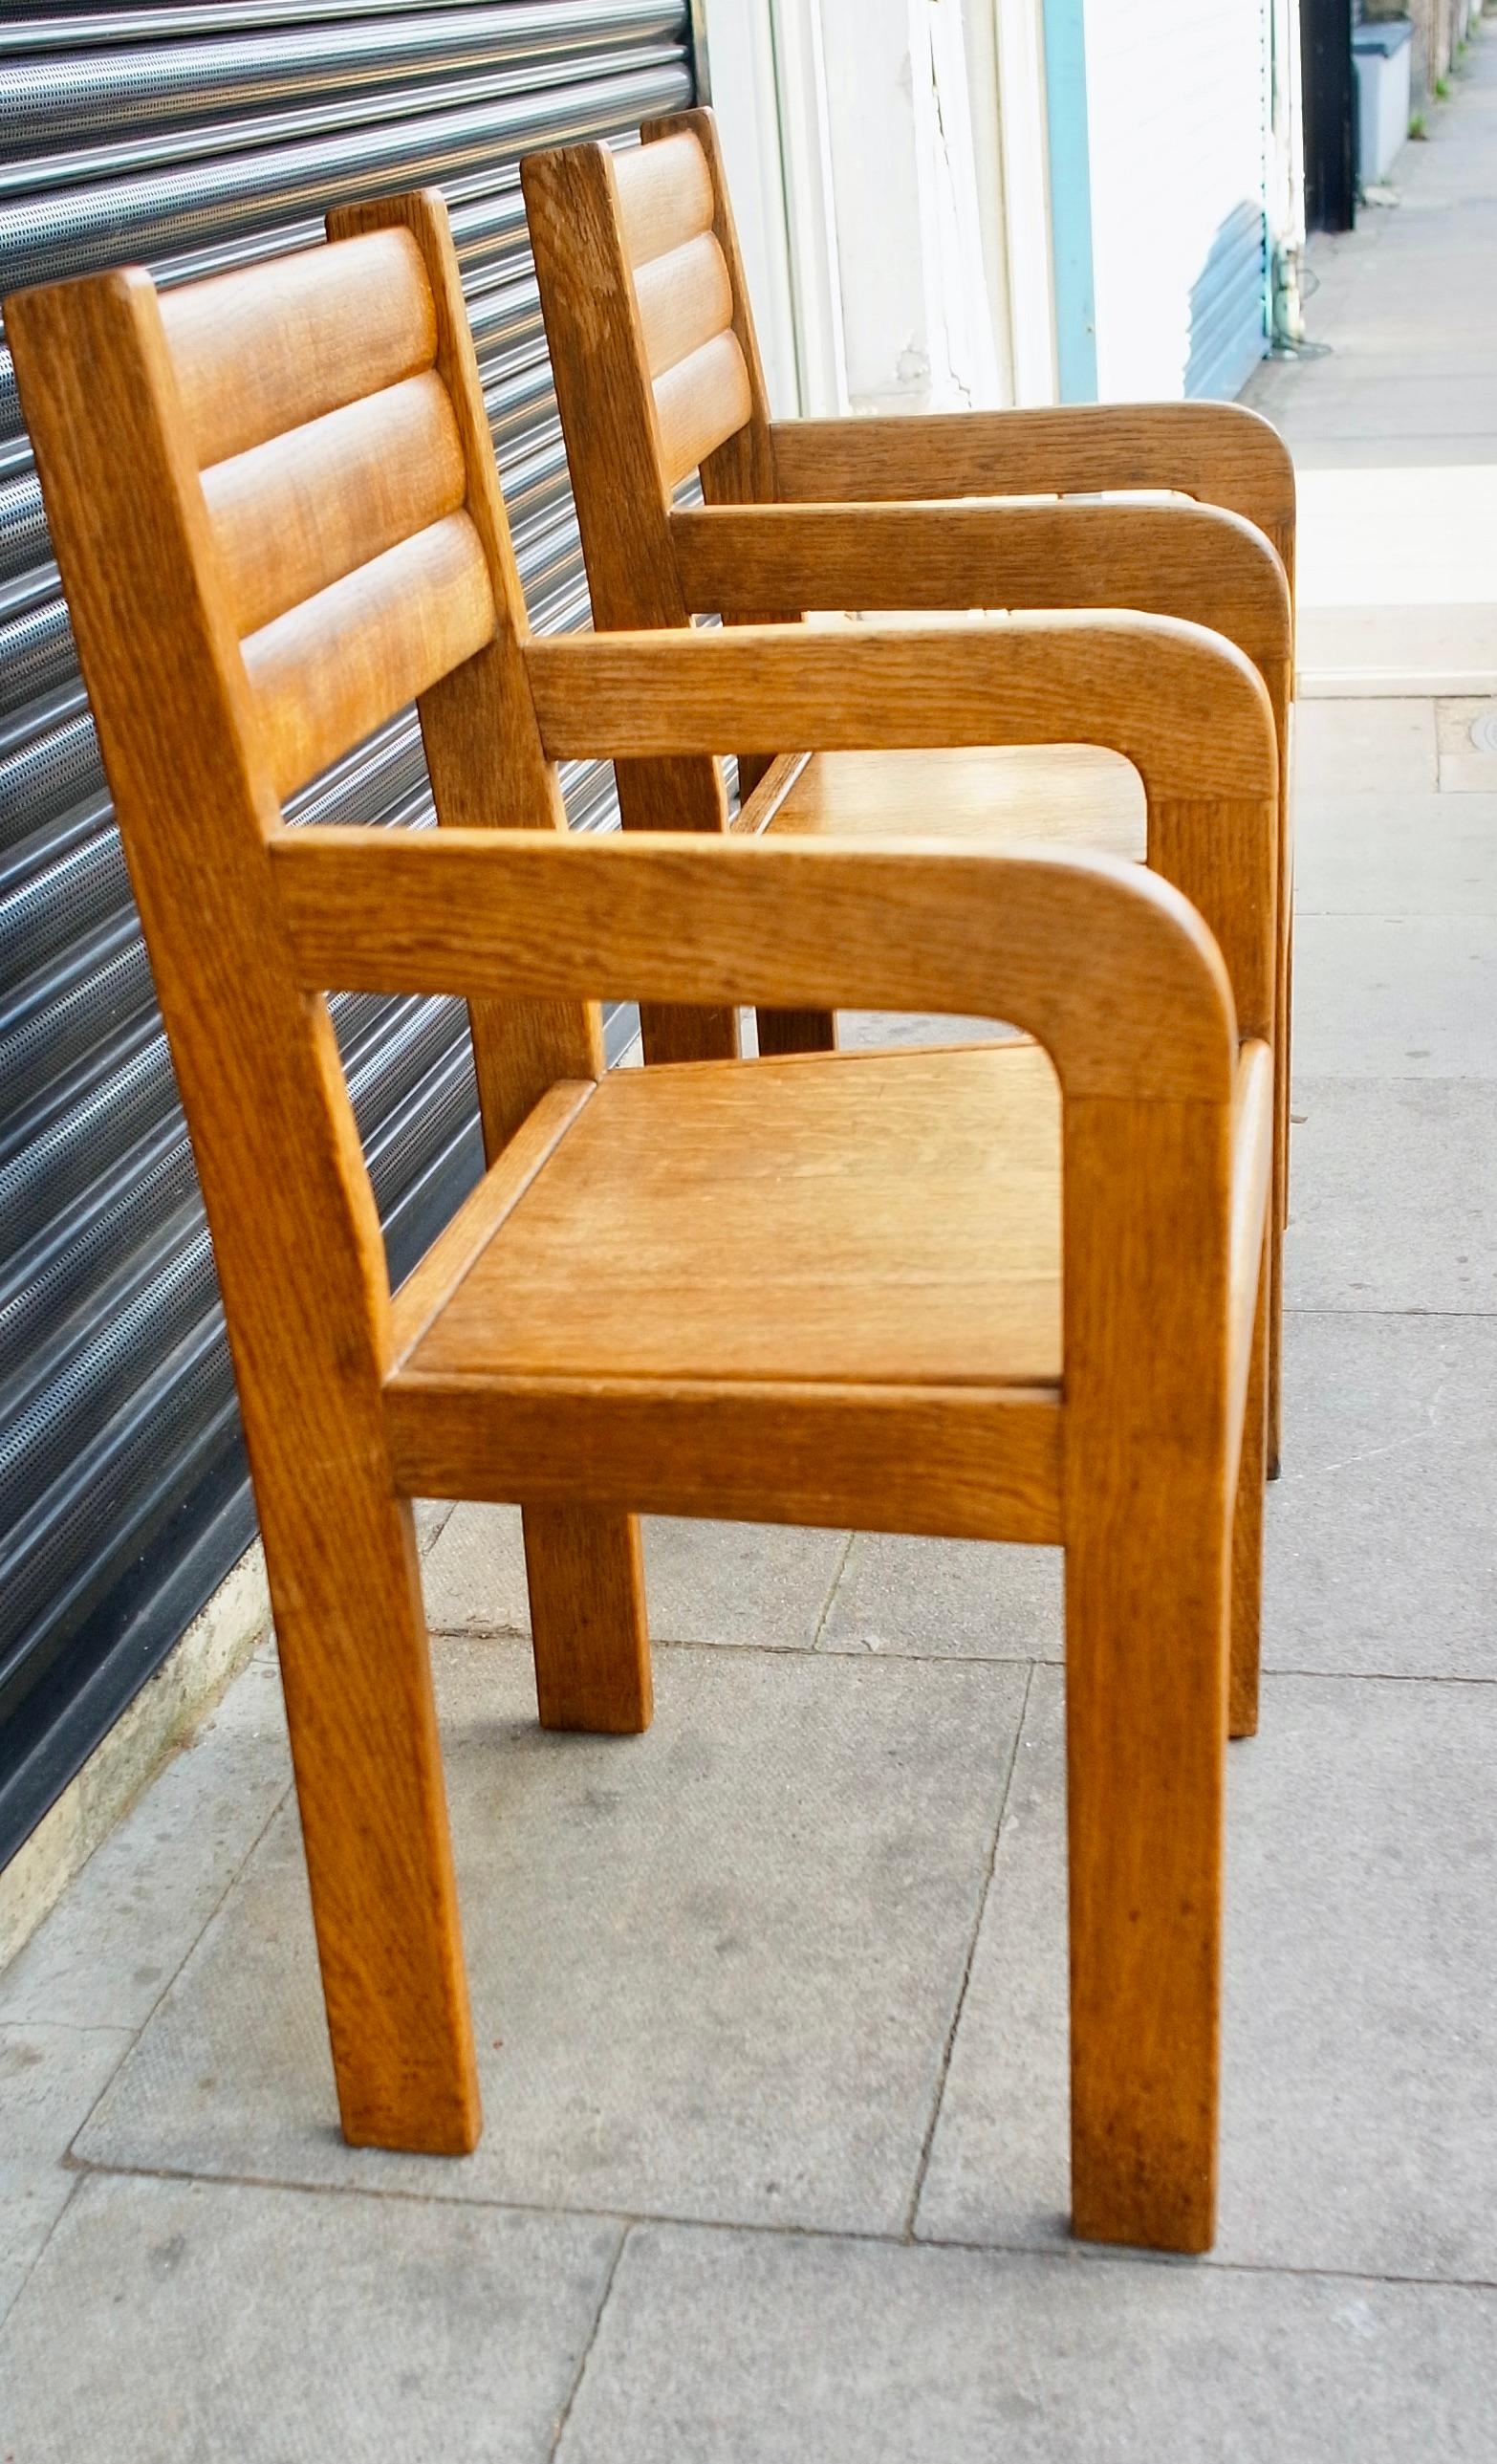 Pair of 1940s Handmade English Oak Vintage Carver/Side Chairs For Sale 3